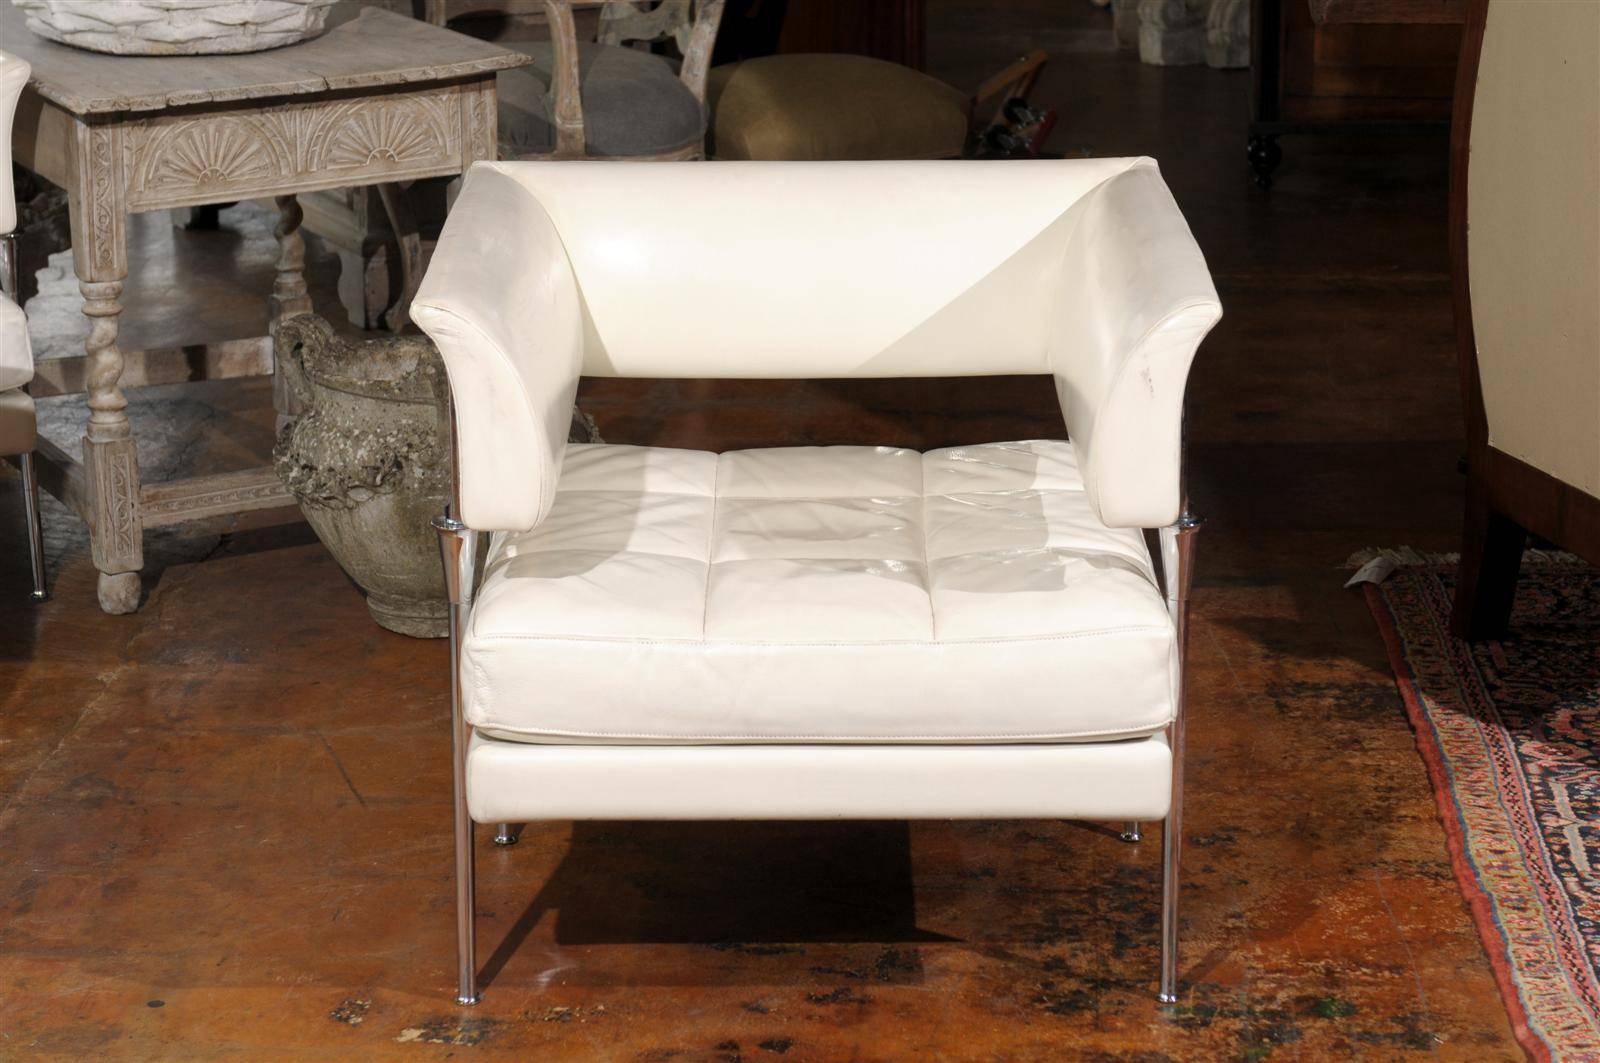 20th Century Pair of Italian Poltrona Frau Hydra Chairs, in Pelle Leather by Luca Scacchetti